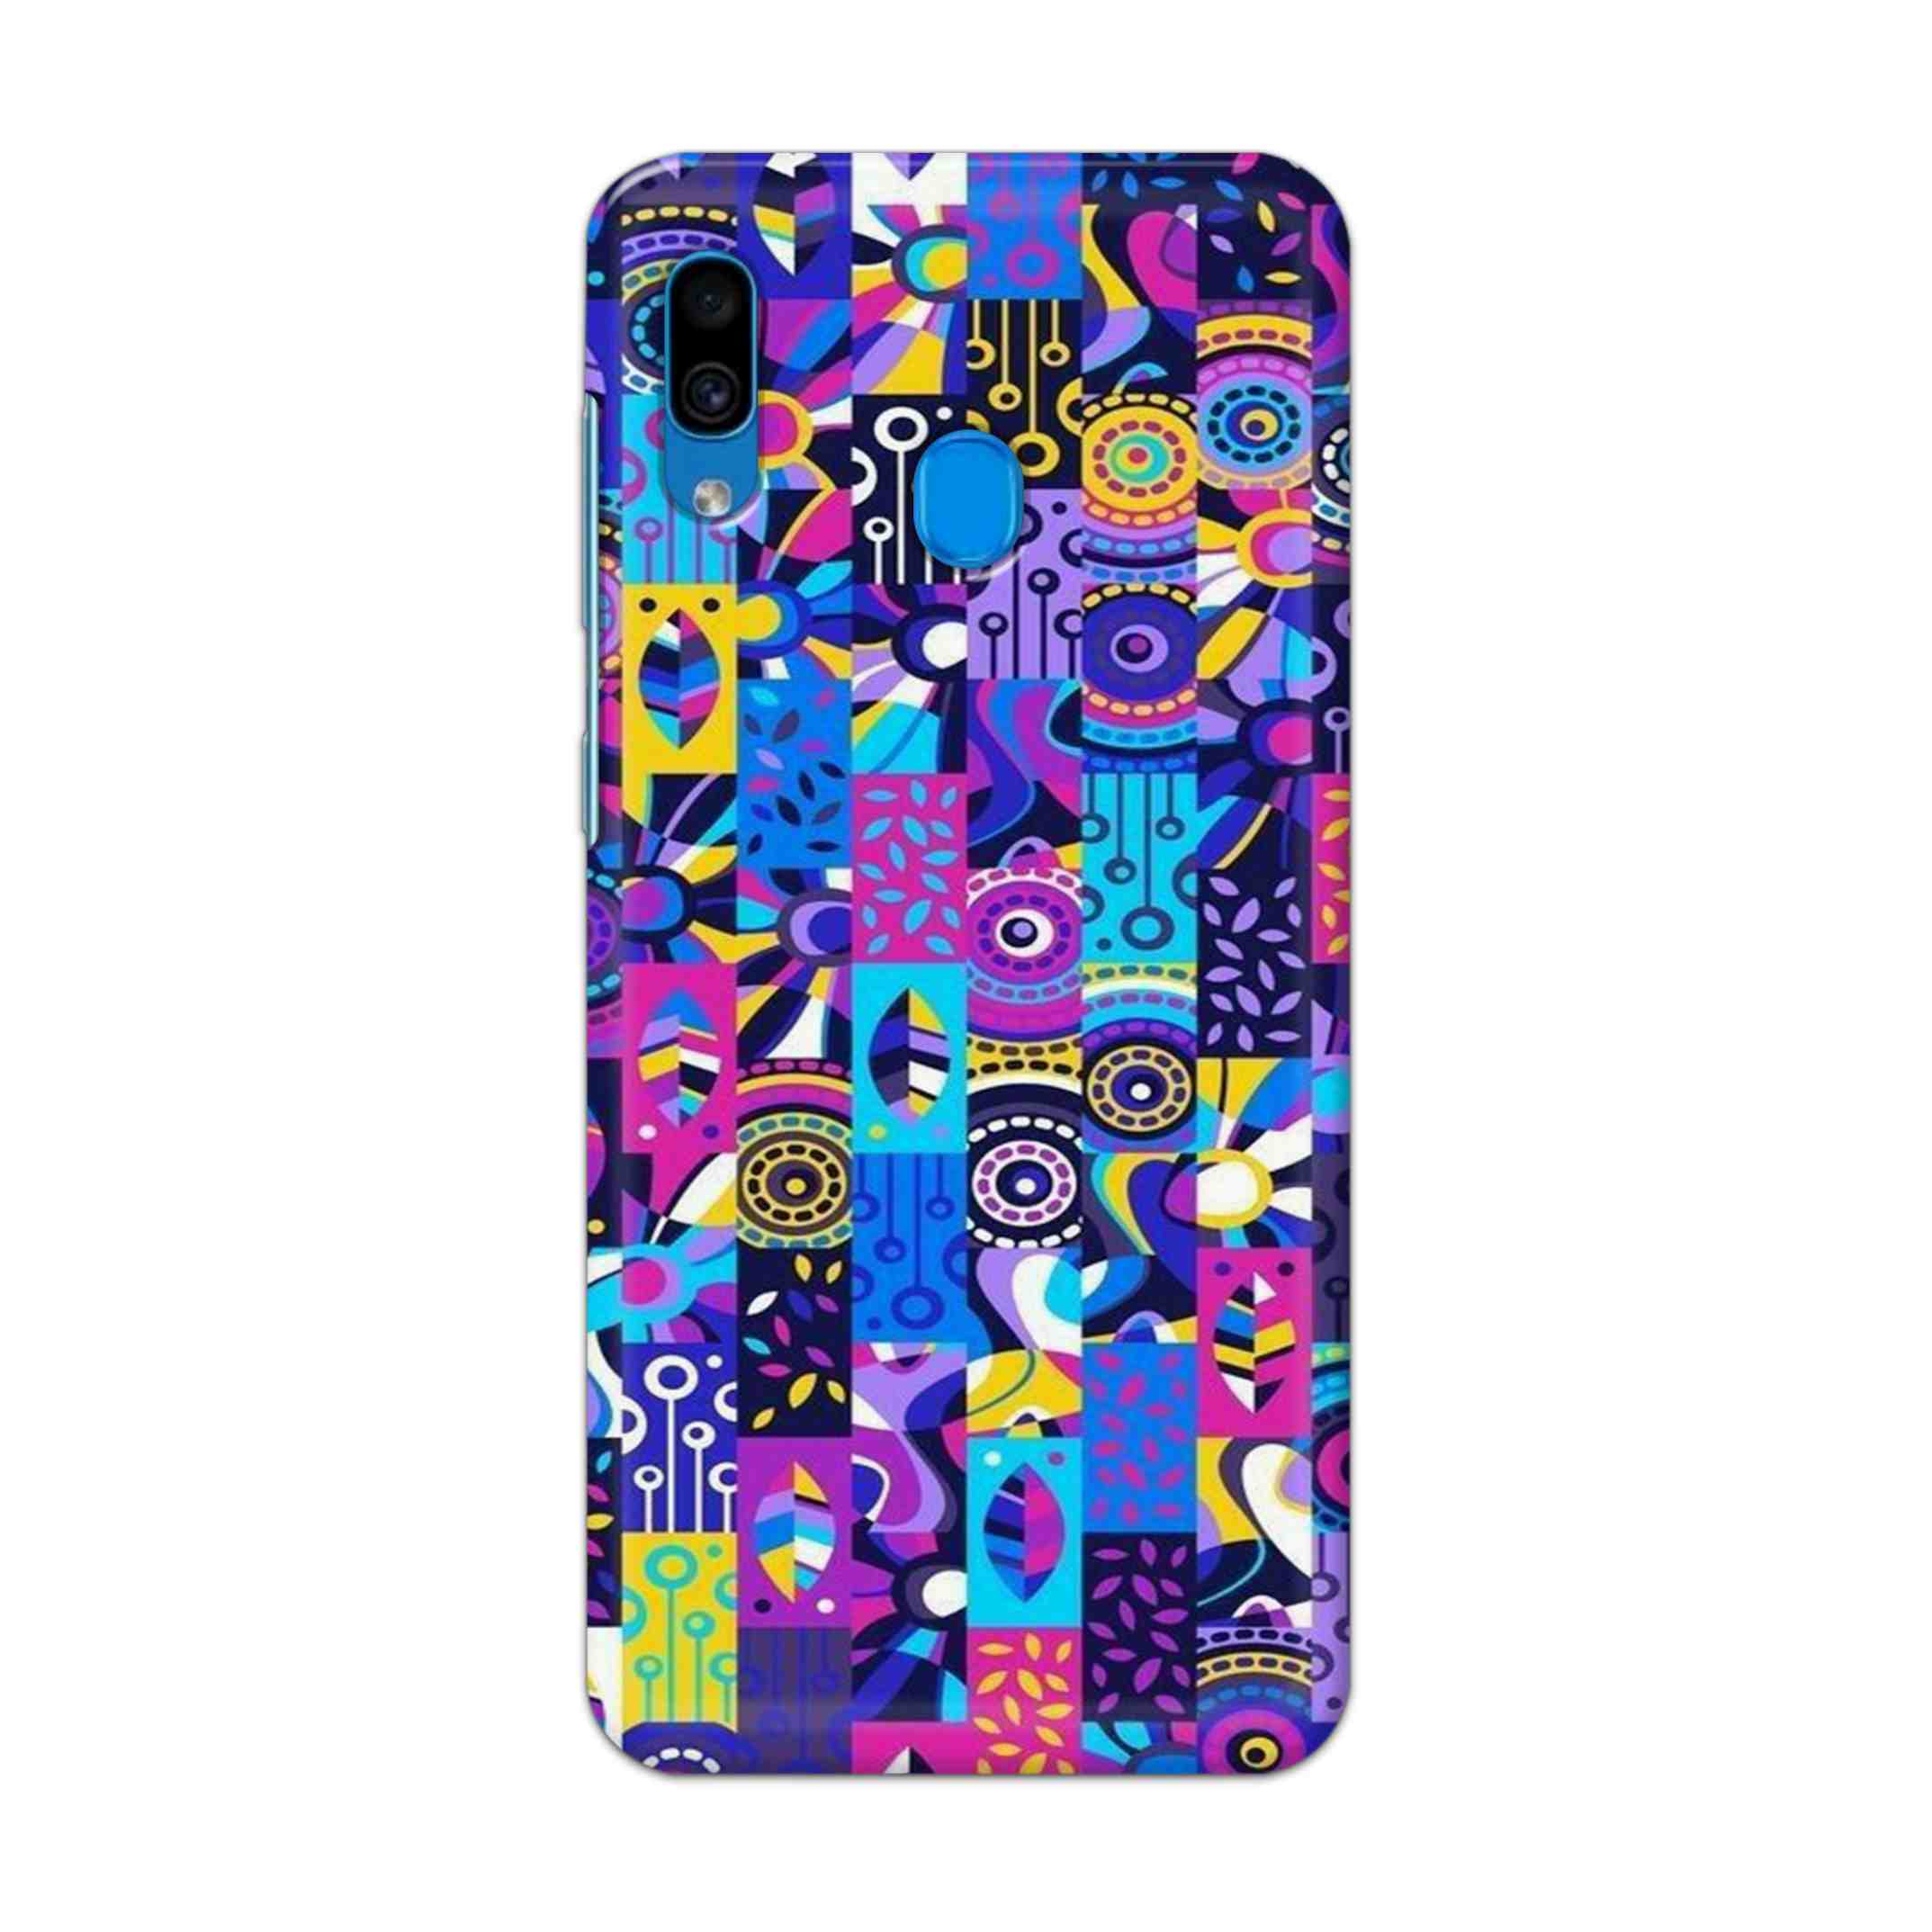 Buy Rainbow Art Hard Back Mobile Phone Case Cover For Samsung Galaxy A30 Online